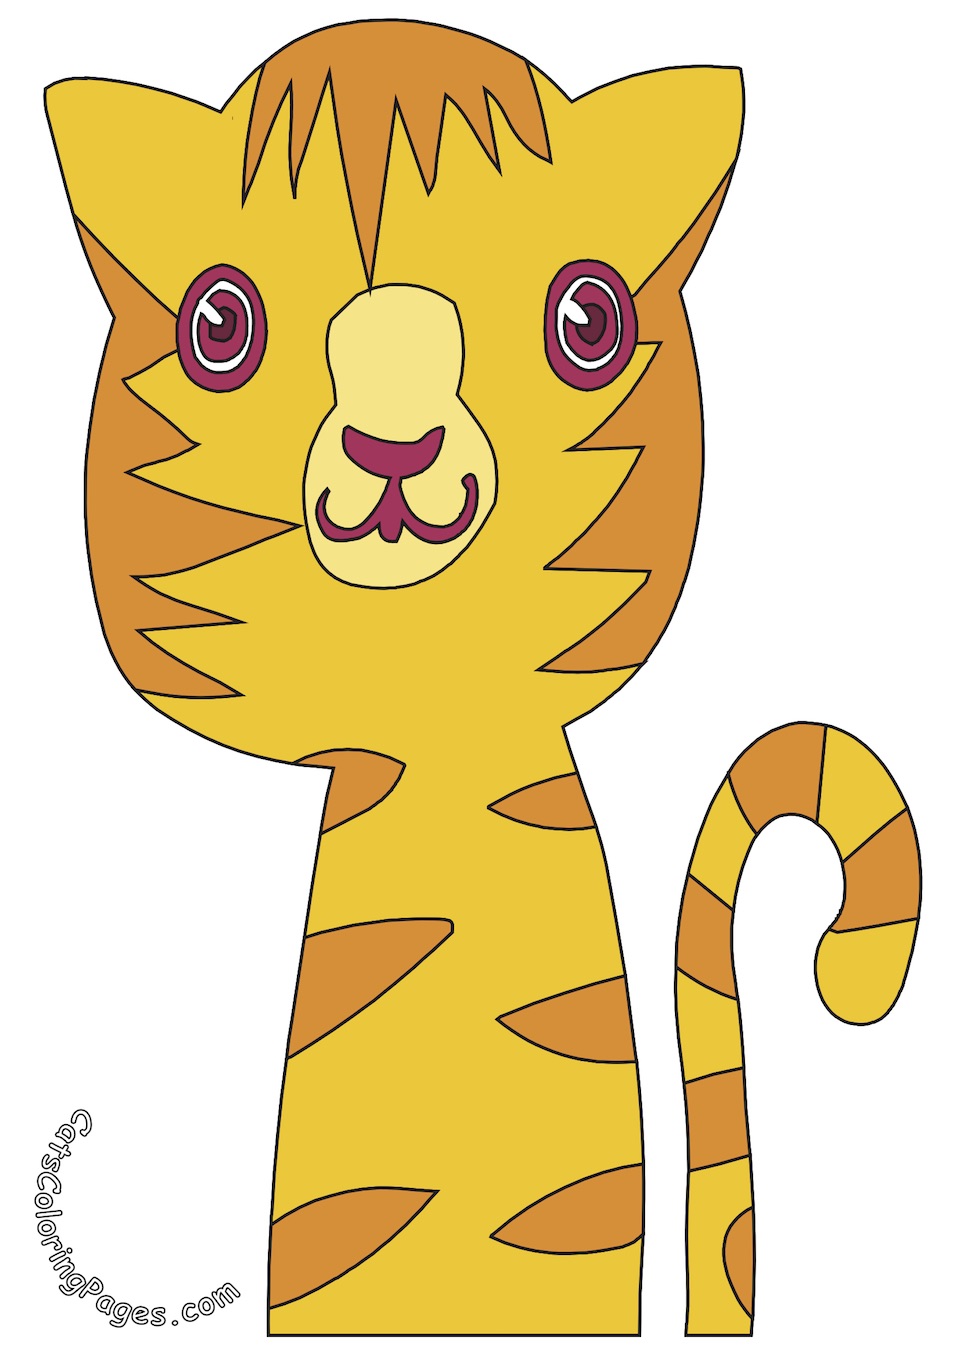 Curious Tabby Cat Colored Coloring Page